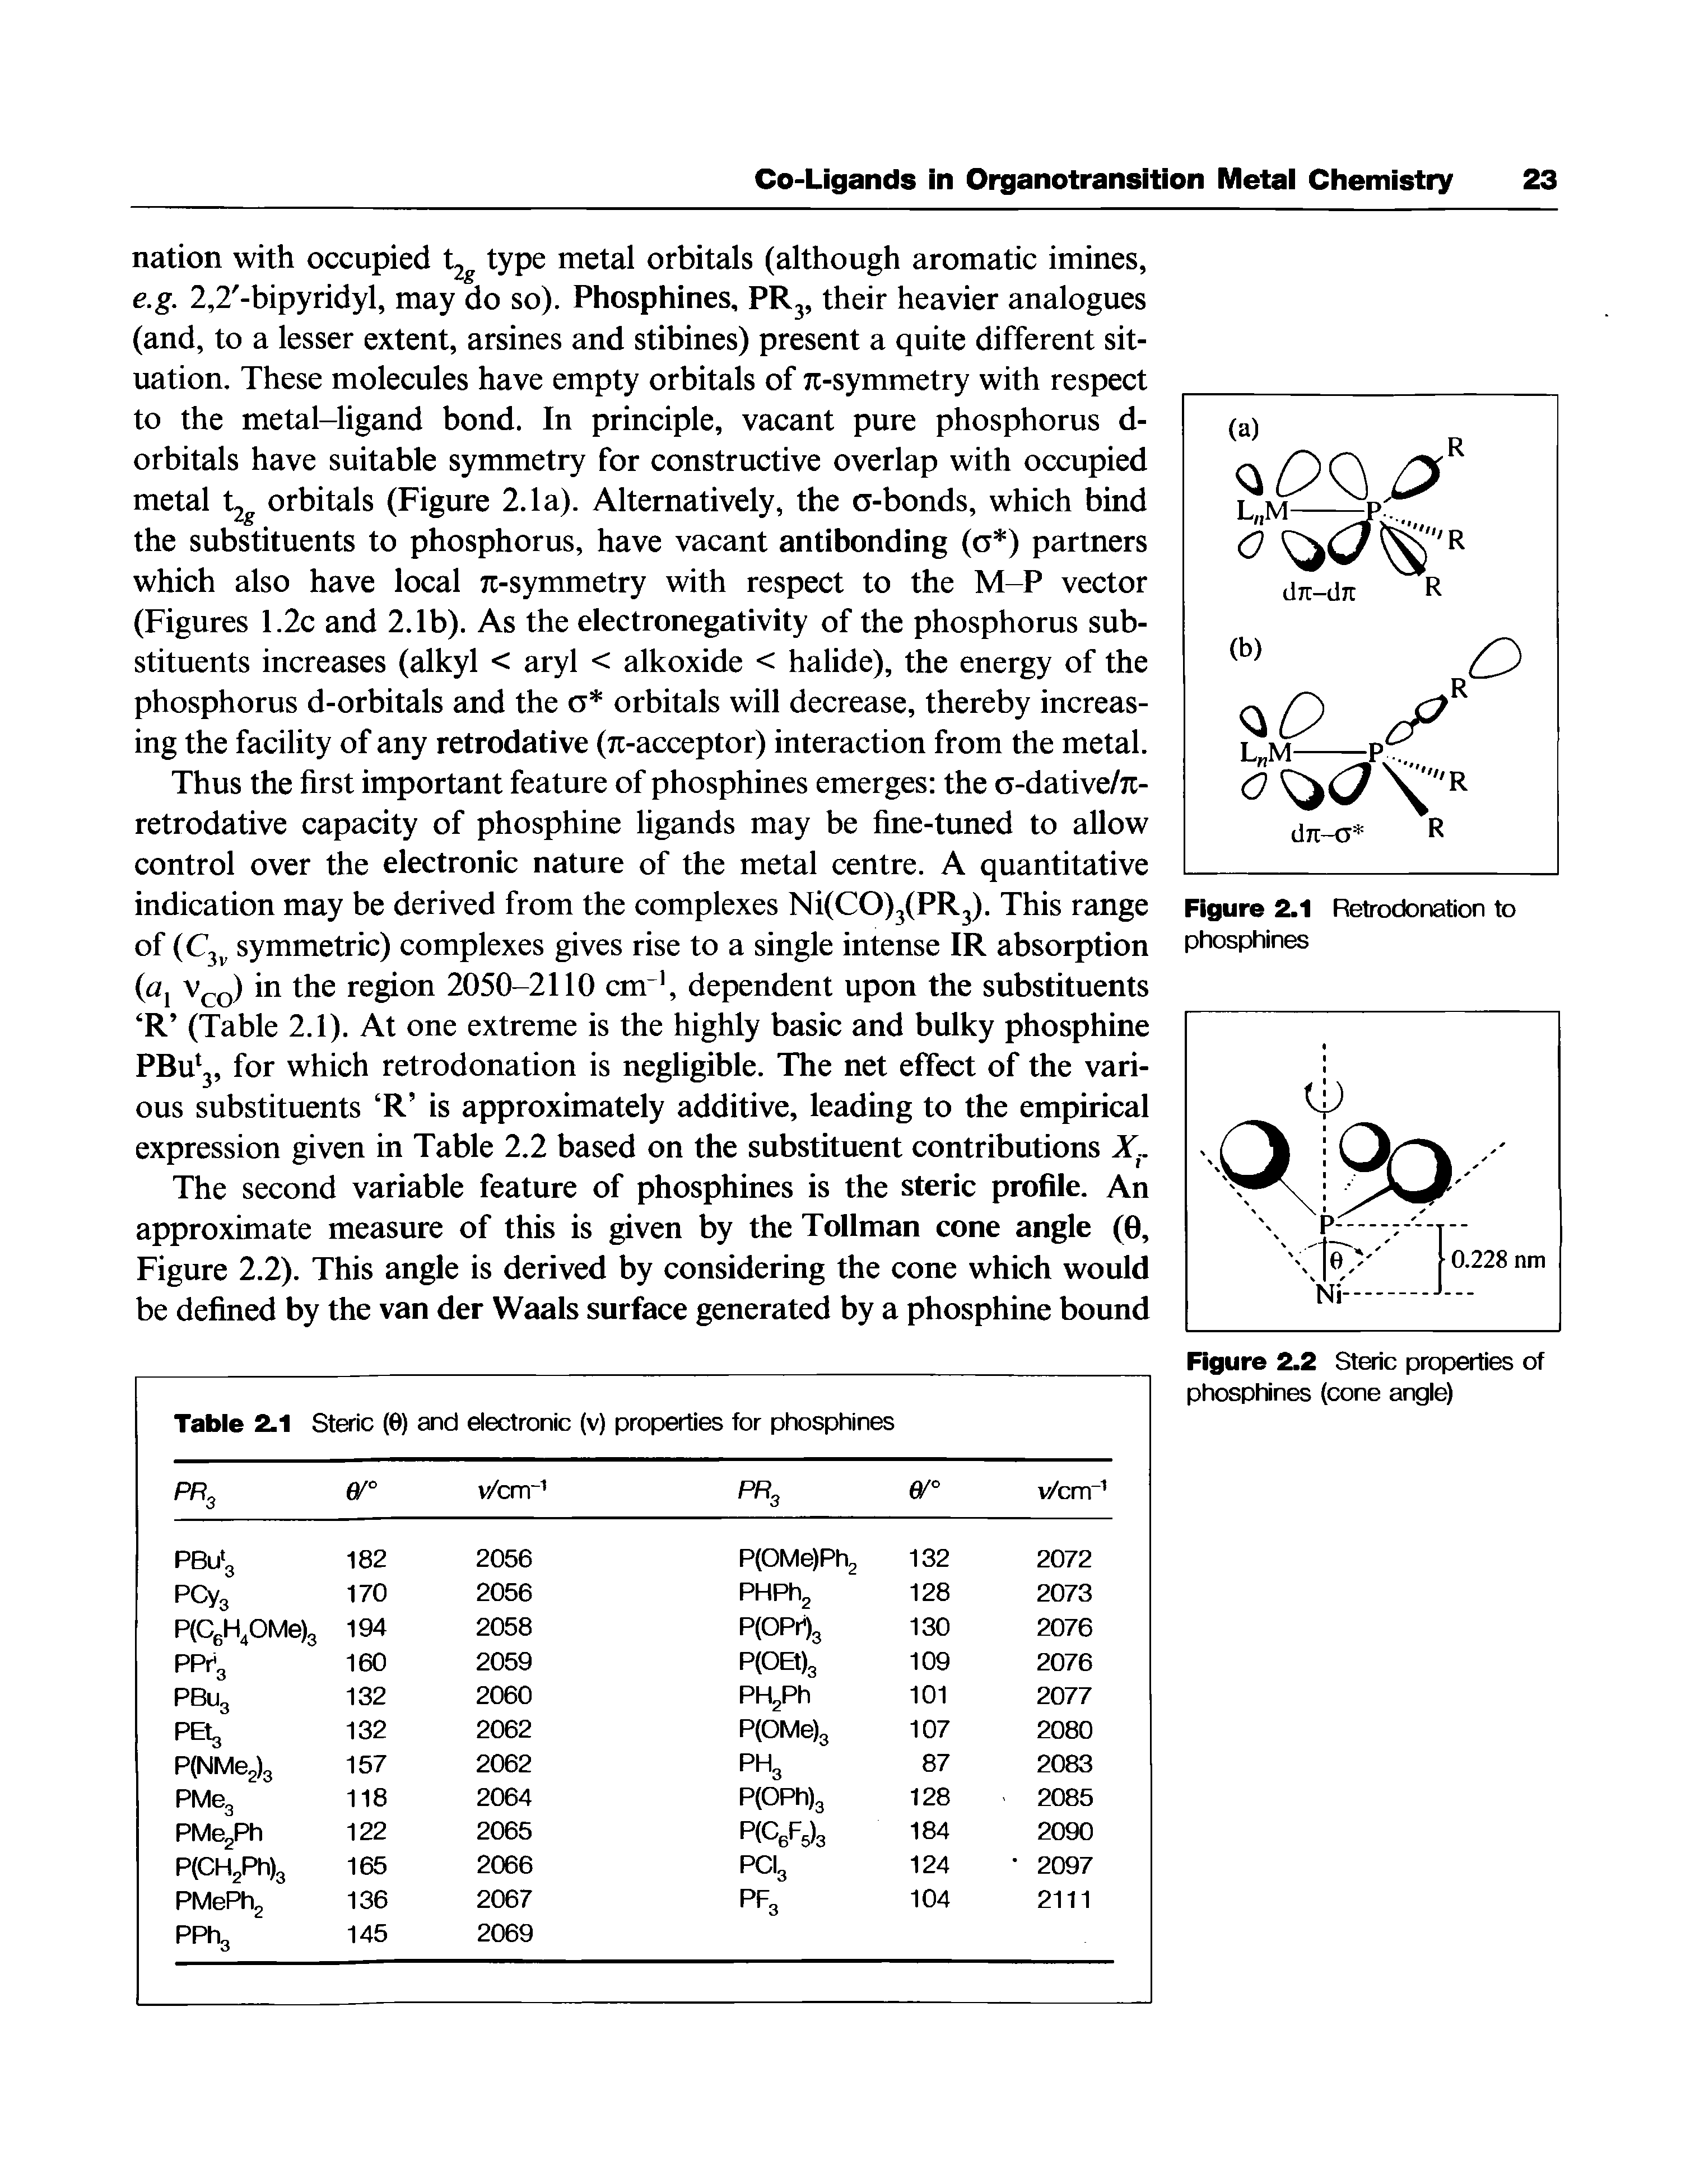 Figure 2.2 Steric properties of phosphines (cone angle)...